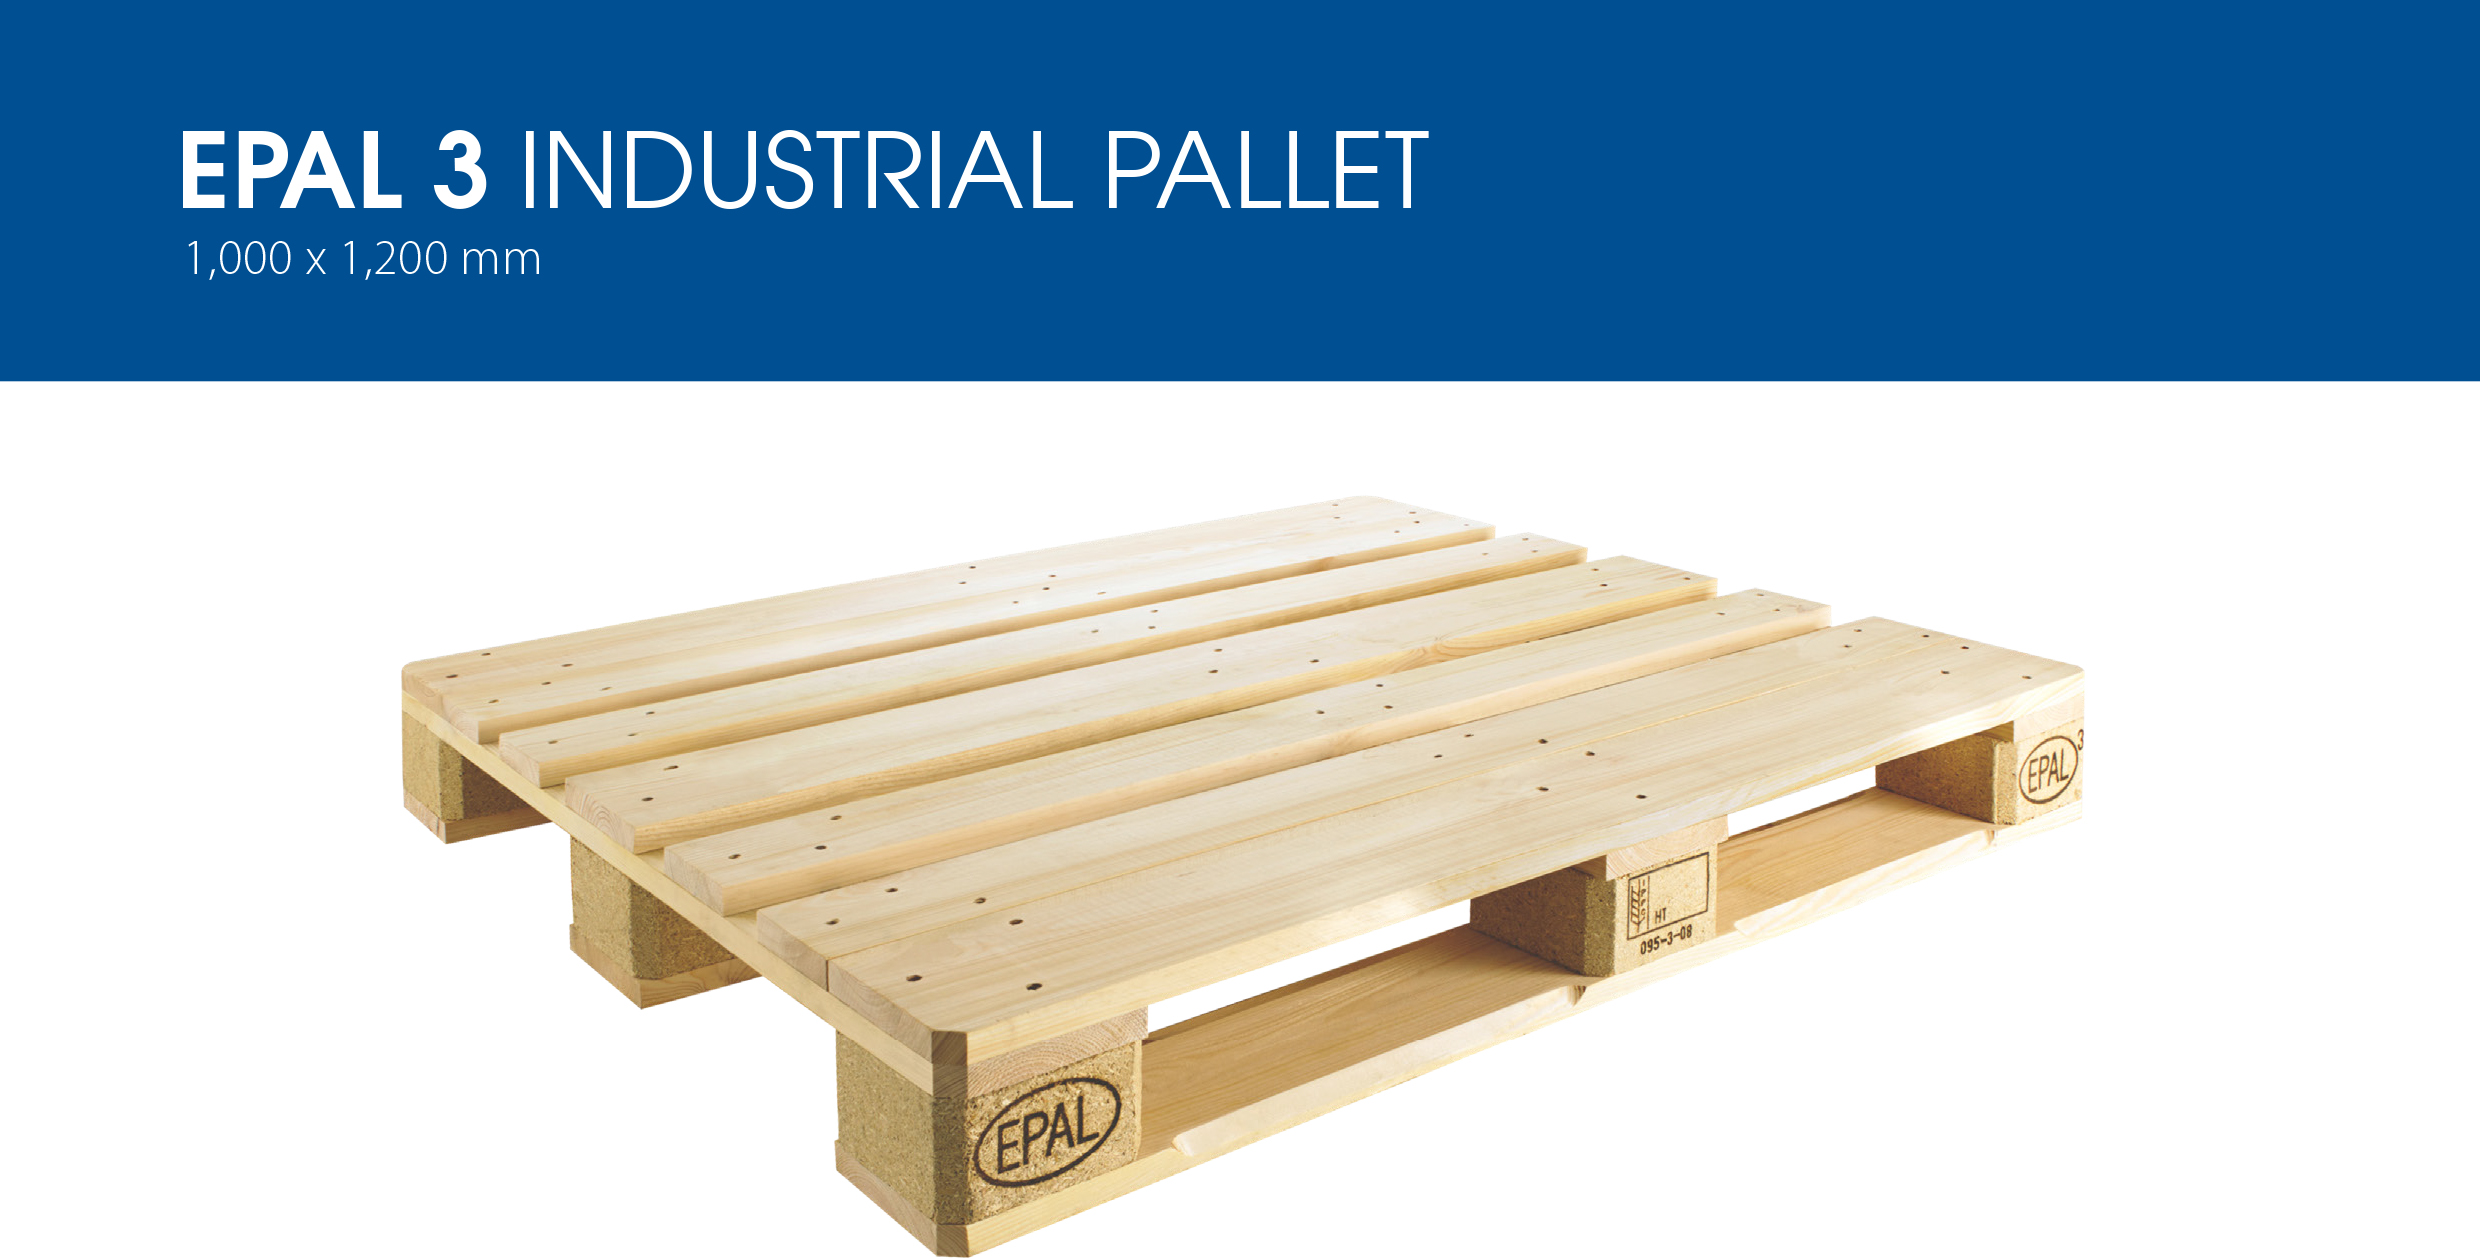 epal 3 indusrial pallet